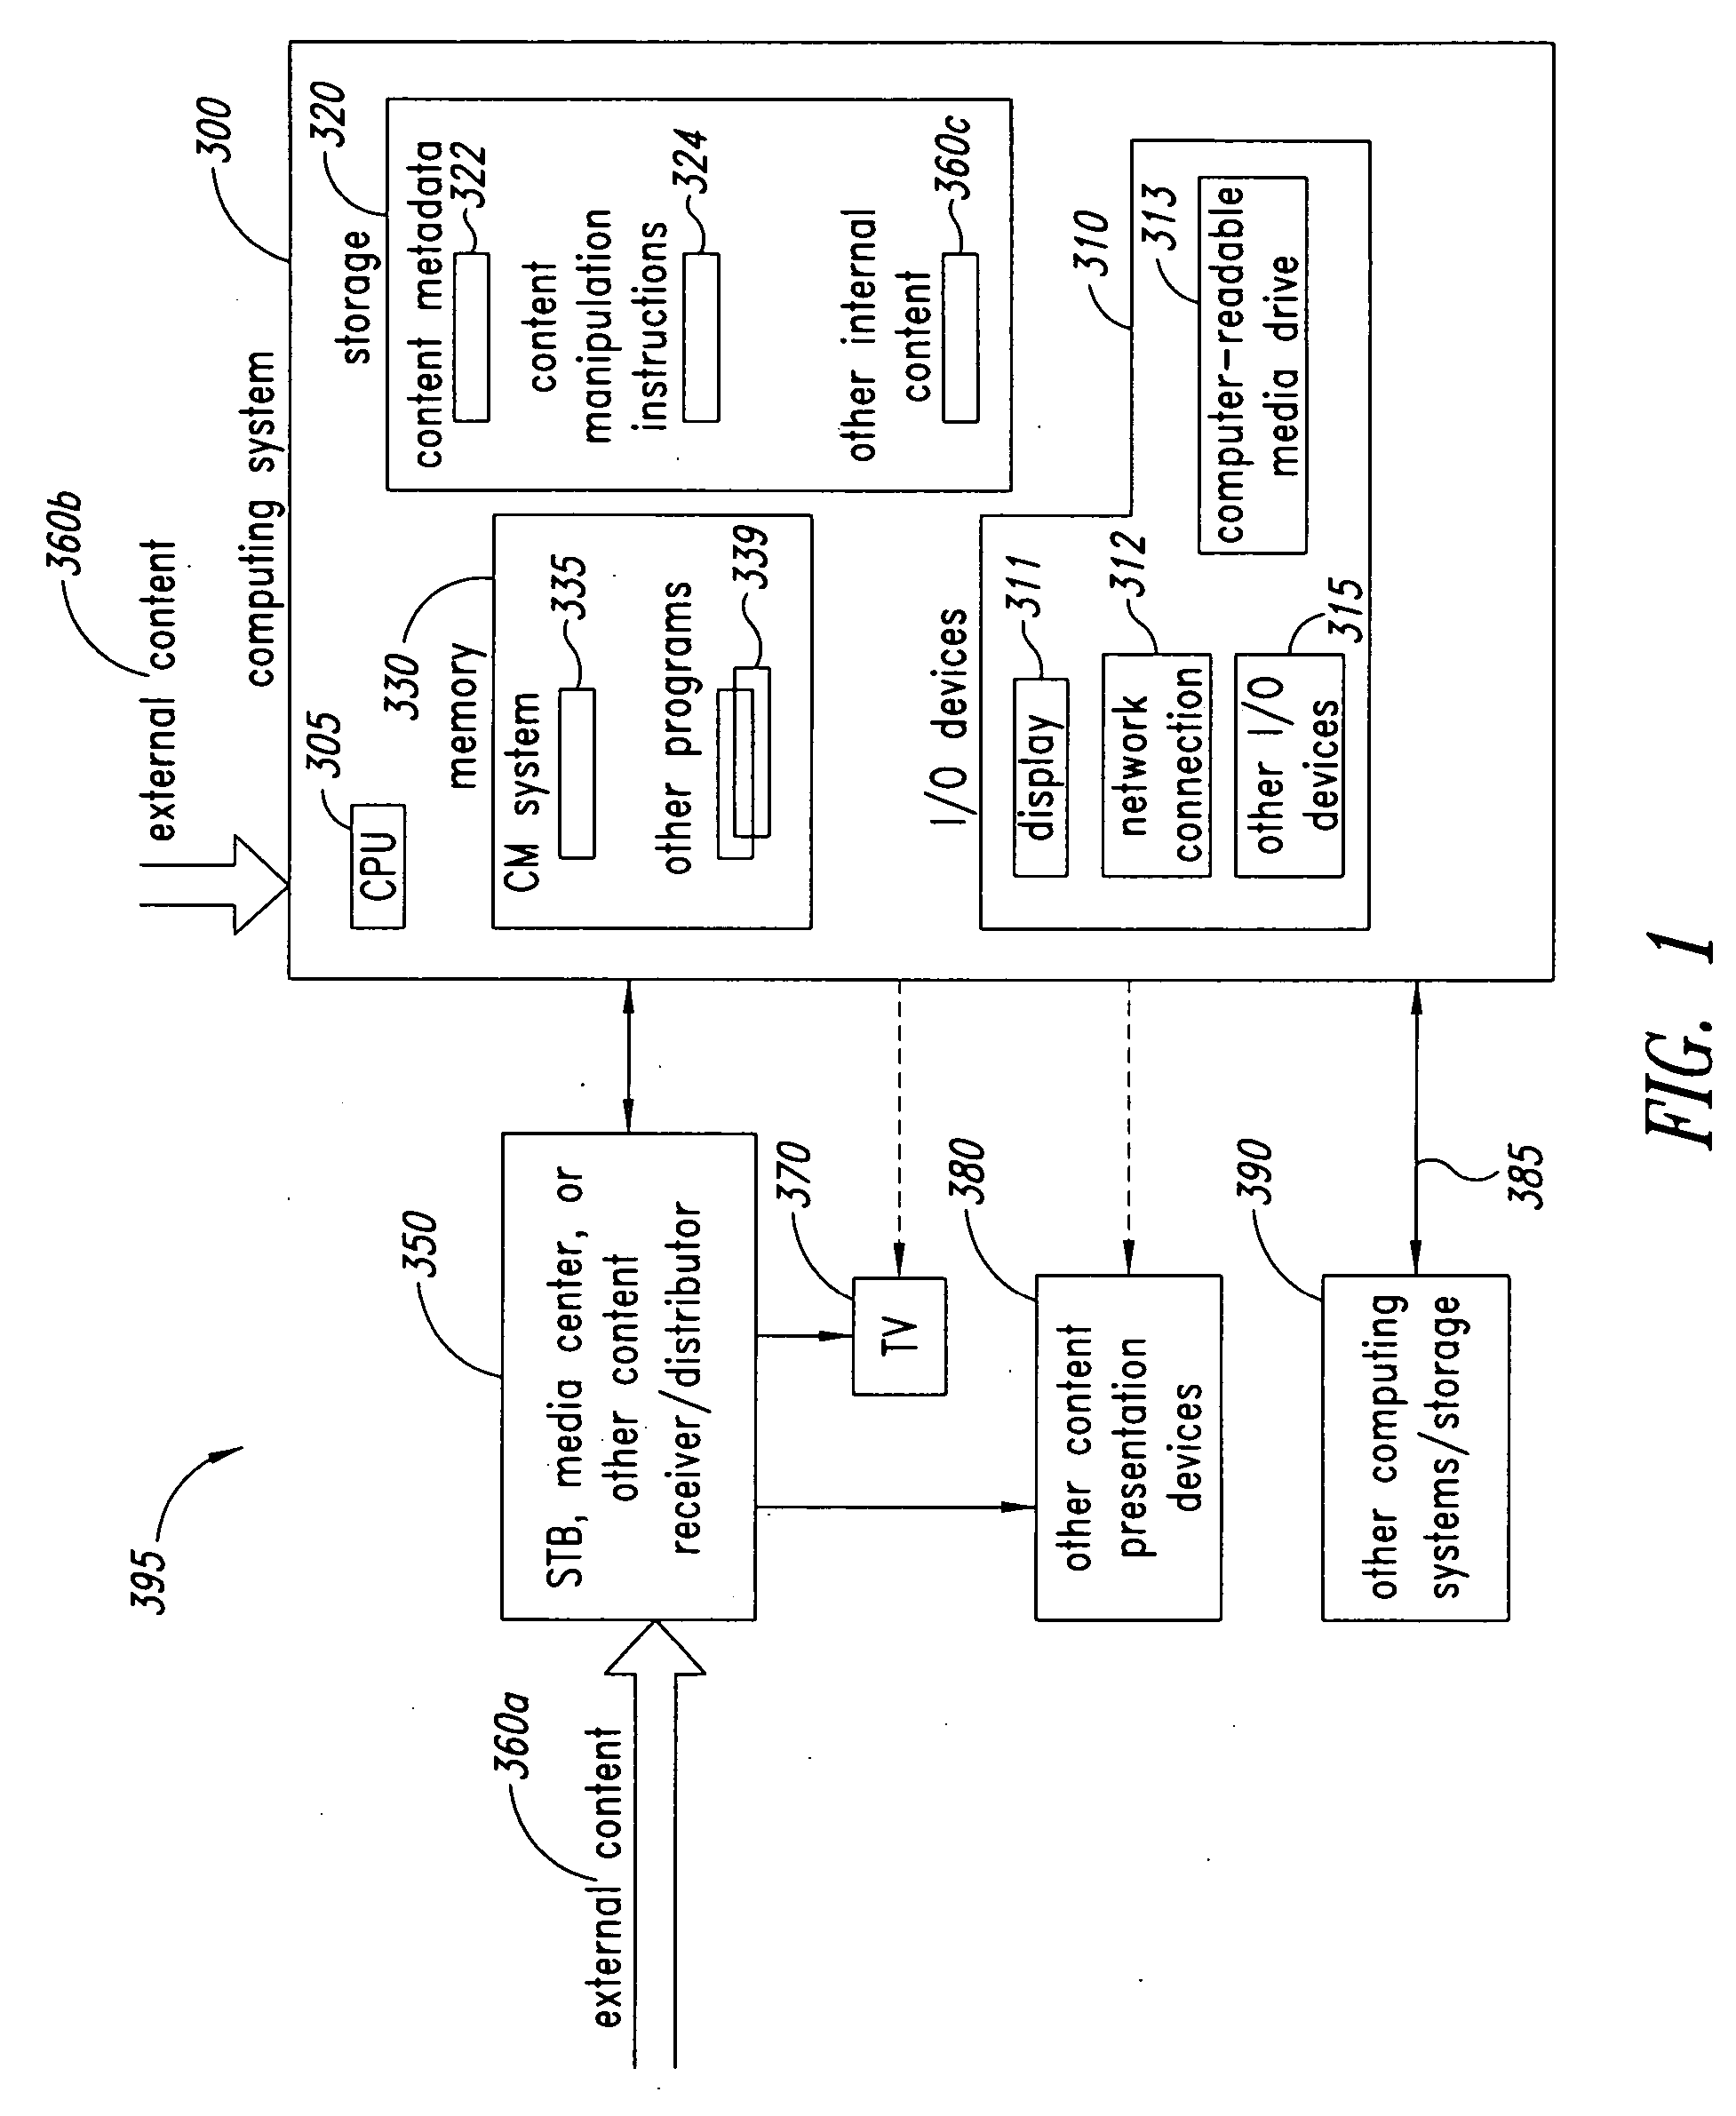 Time-based graphical user interface for multimedia content